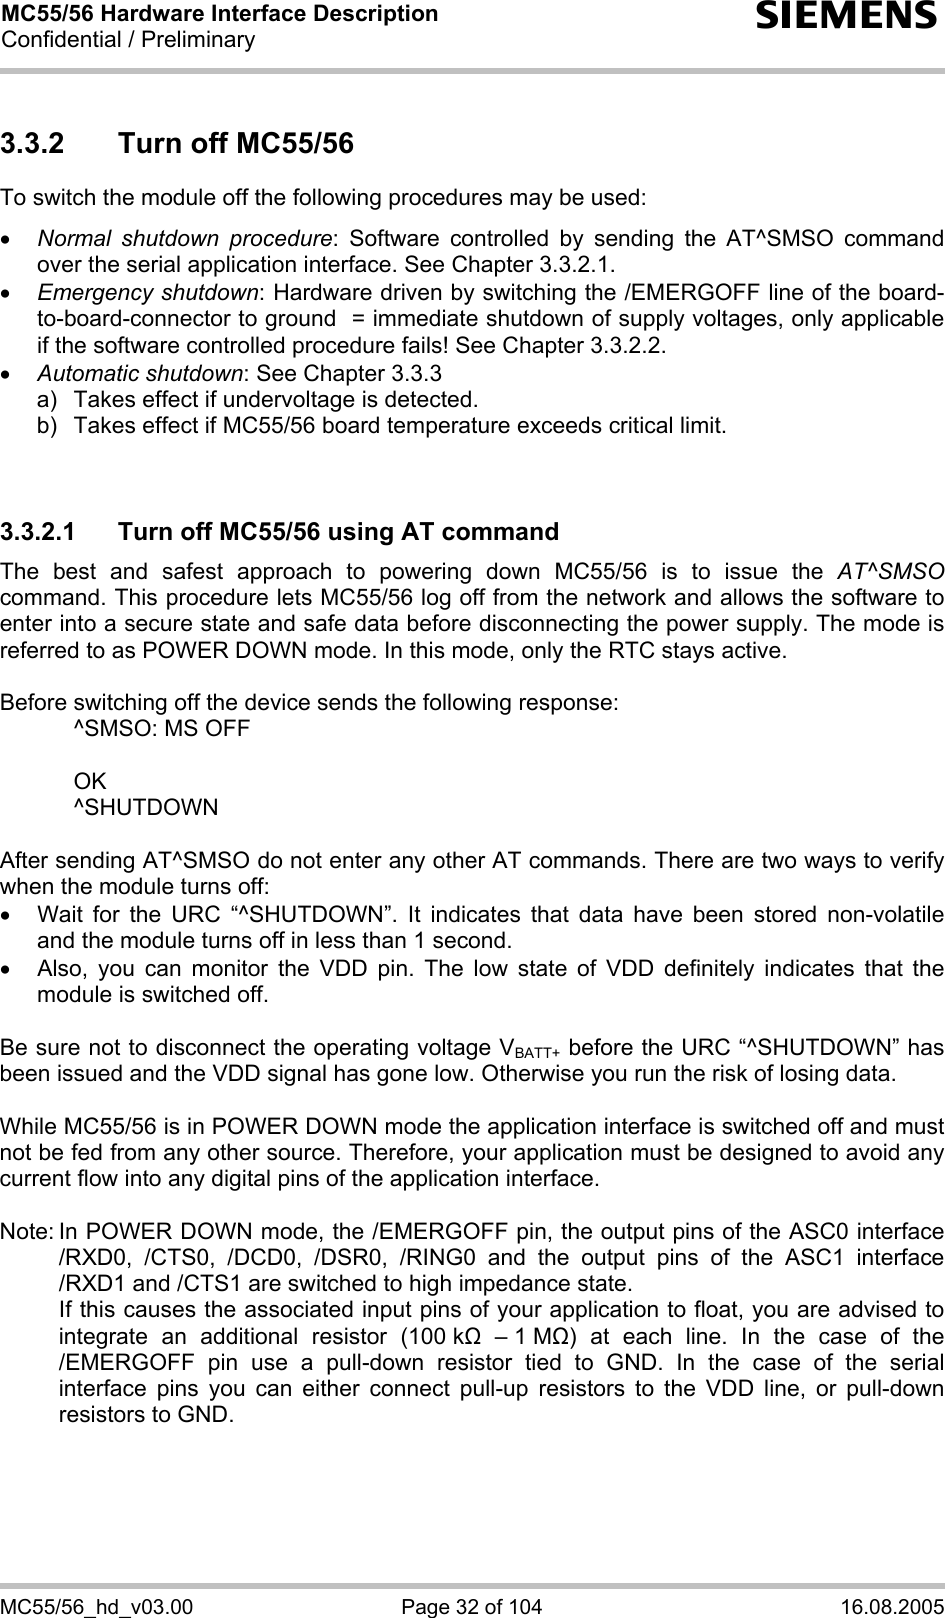 MC55/56 Hardware Interface Description Confidential / Preliminary s MC55/56_hd_v03.00  Page 32 of 104  16.08.2005 3.3.2  Turn off MC55/56 To switch the module off the following procedures may be used:  • Normal shutdown procedure: Software controlled by sending the AT^SMSO command over the serial application interface. See Chapter 3.3.2.1. • Emergency shutdown: Hardware driven by switching the /EMERGOFF line of the board-to-board-connector to ground  = immediate shutdown of supply voltages, only applicable if the software controlled procedure fails! See Chapter 3.3.2.2. • Automatic shutdown: See Chapter 3.3.3 a)   Takes effect if undervoltage is detected.  b)   Takes effect if MC55/56 board temperature exceeds critical limit.   3.3.2.1  Turn off MC55/56 using AT command The best and safest approach to powering down MC55/56 is to issue the AT^SMSO command. This procedure lets MC55/56 log off from the network and allows the software to enter into a secure state and safe data before disconnecting the power supply. The mode is referred to as POWER DOWN mode. In this mode, only the RTC stays active.  Before switching off the device sends the following response:    ^SMSO: MS OFF    OK   ^SHUTDOWN  After sending AT^SMSO do not enter any other AT commands. There are two ways to verify when the module turns off:  •  Wait for the URC “^SHUTDOWN”. It indicates that data have been stored non-volatile and the module turns off in less than 1 second. •  Also, you can monitor the VDD pin. The low state of VDD definitely indicates that the module is switched off.  Be sure not to disconnect the operating voltage VBATT+ before the URC “^SHUTDOWN” has been issued and the VDD signal has gone low. Otherwise you run the risk of losing data.   While MC55/56 is in POWER DOWN mode the application interface is switched off and must not be fed from any other source. Therefore, your application must be designed to avoid any current flow into any digital pins of the application interface.   Note: In POWER DOWN mode, the /EMERGOFF pin, the output pins of the ASC0 interface /RXD0, /CTS0, /DCD0, /DSR0, /RING0 and the output pins of the ASC1 interface /RXD1 and /CTS1 are switched to high impedance state.    If this causes the associated input pins of your application to float, you are advised to integrate an additional resistor (100 k  – 1 M) at each line. In the case of the /EMERGOFF pin use a pull-down resistor tied to GND. In the case of the serial interface pins you can either connect pull-up resistors to the VDD line, or pull-down resistors to GND.  